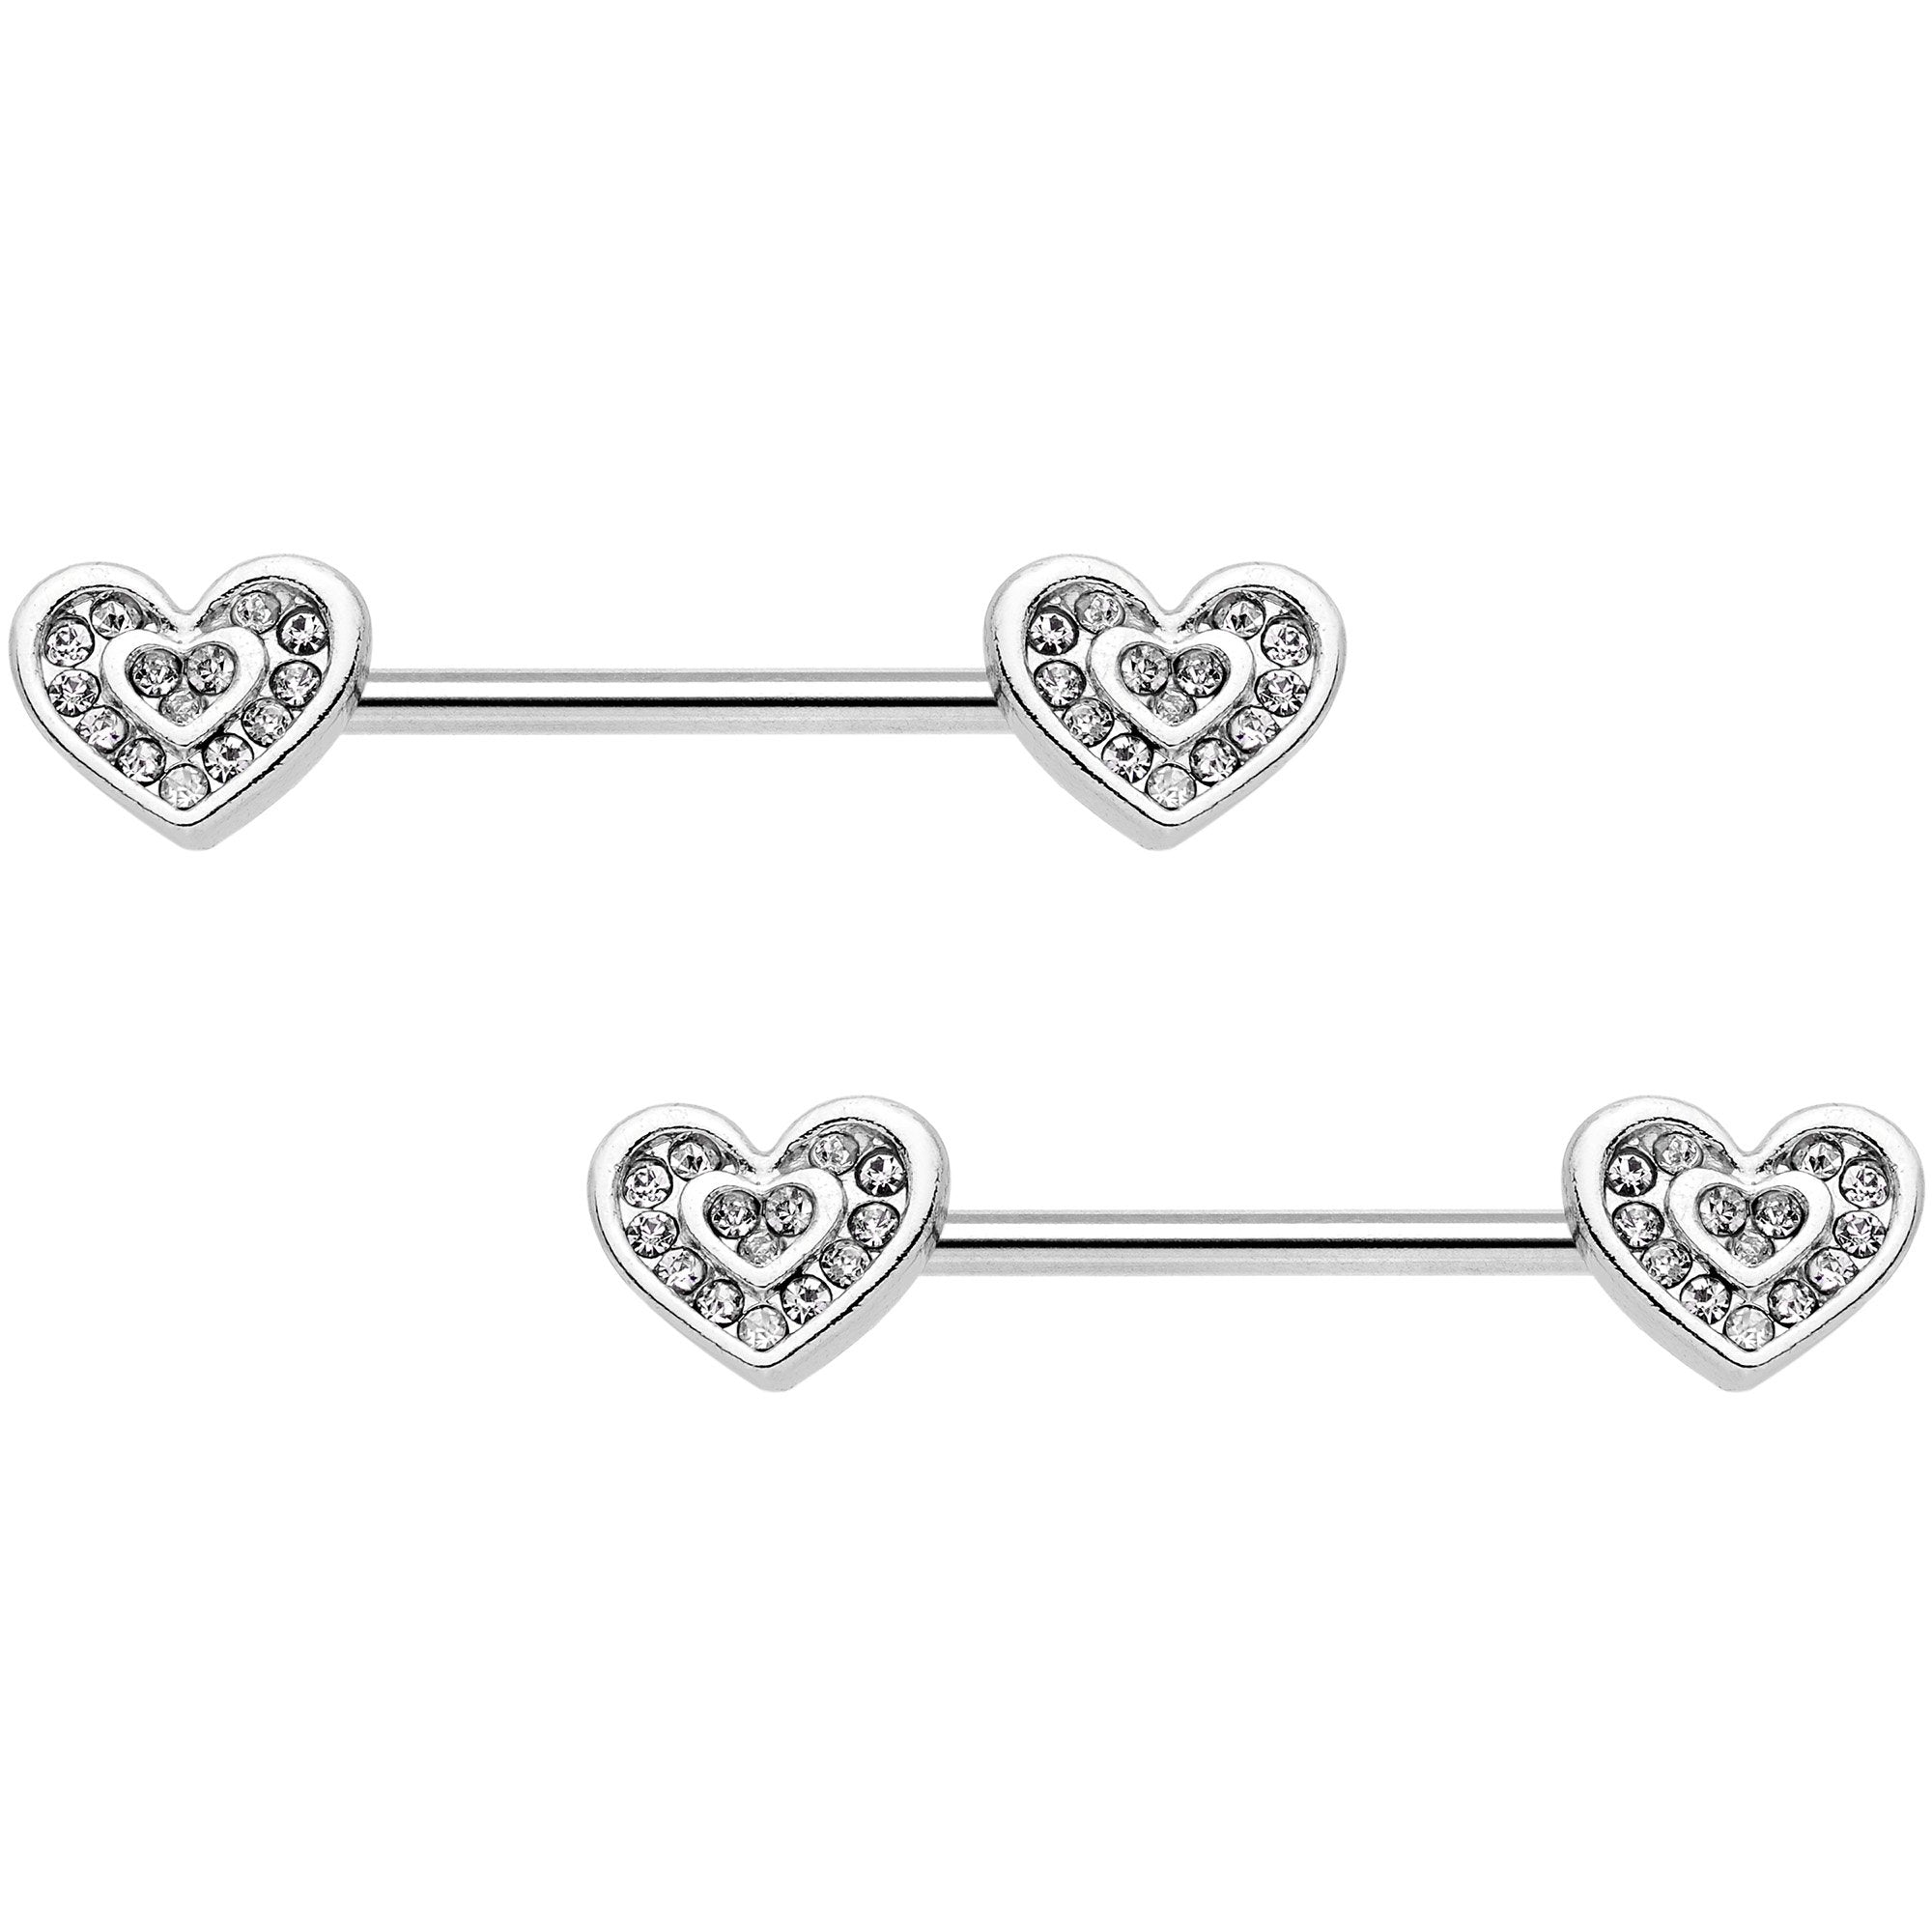 14 Gauge 5/8 Clear Gem Wrapped Hearts Barbell Nipple Ring Set